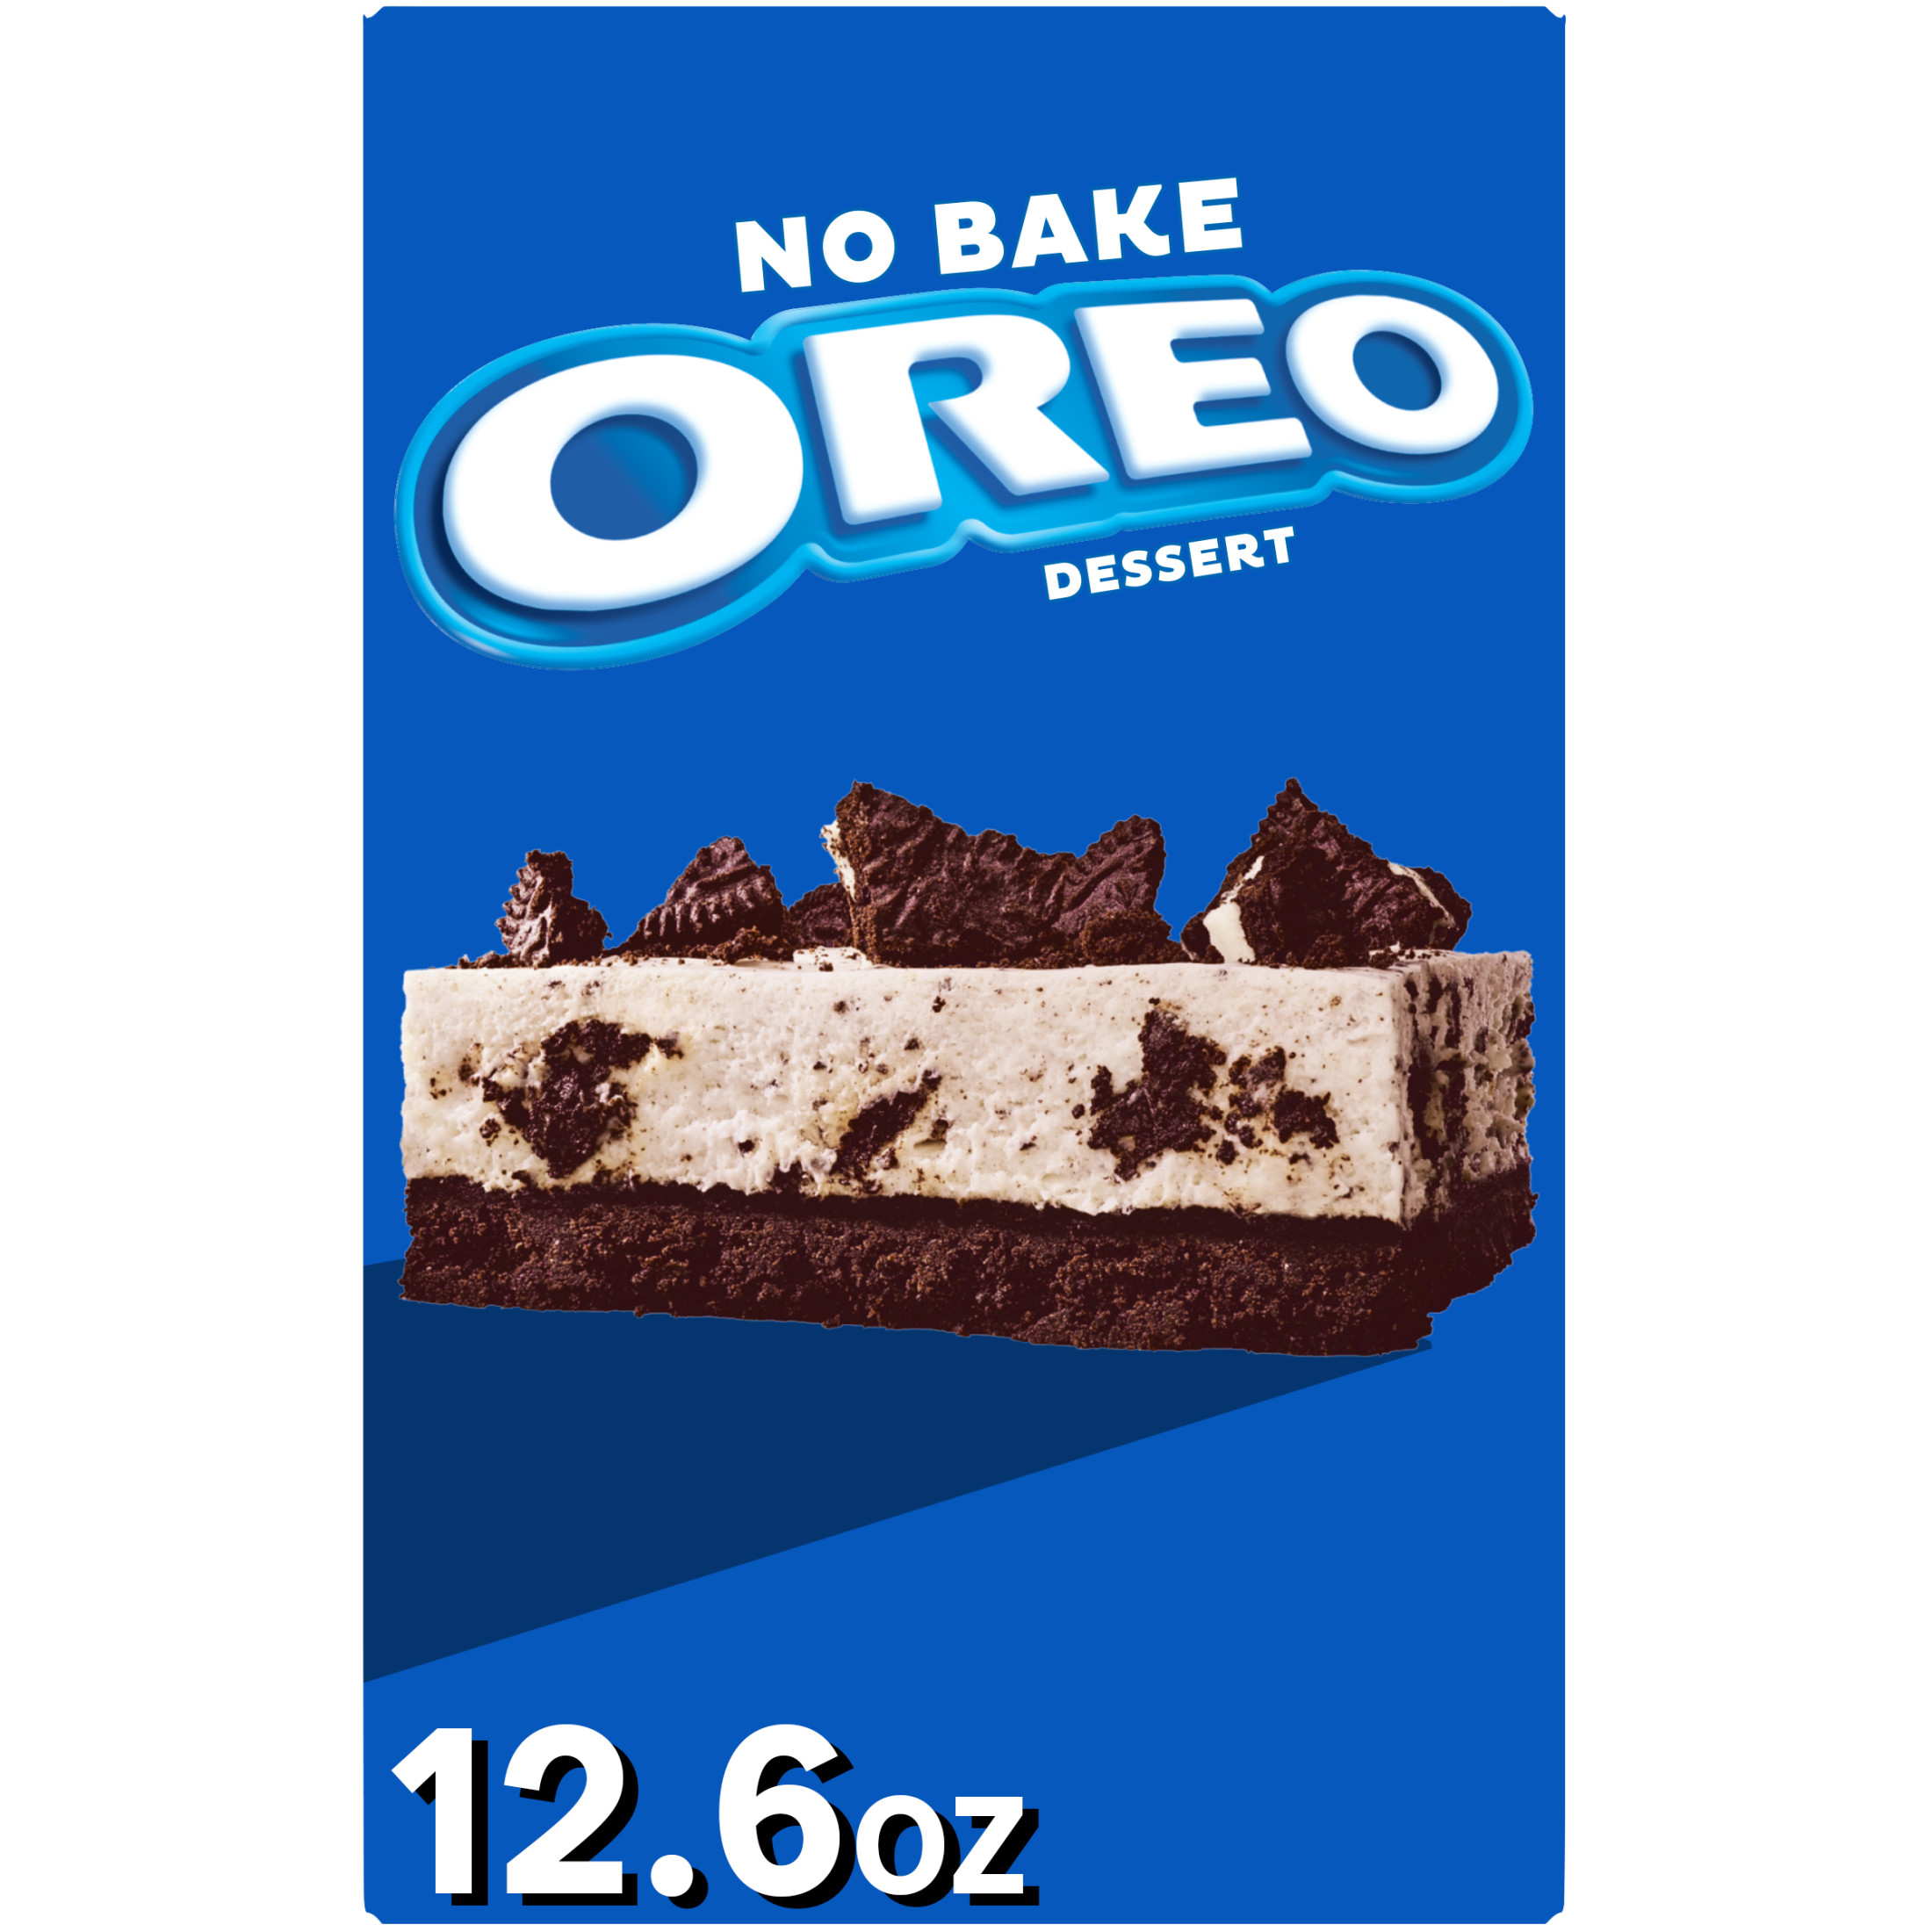 Jell-O No Bake Oreo Dessert Kit with Filling Mix, Crust Mix & Cookie Pieces, 12.6 oz Box - image 1 of 14